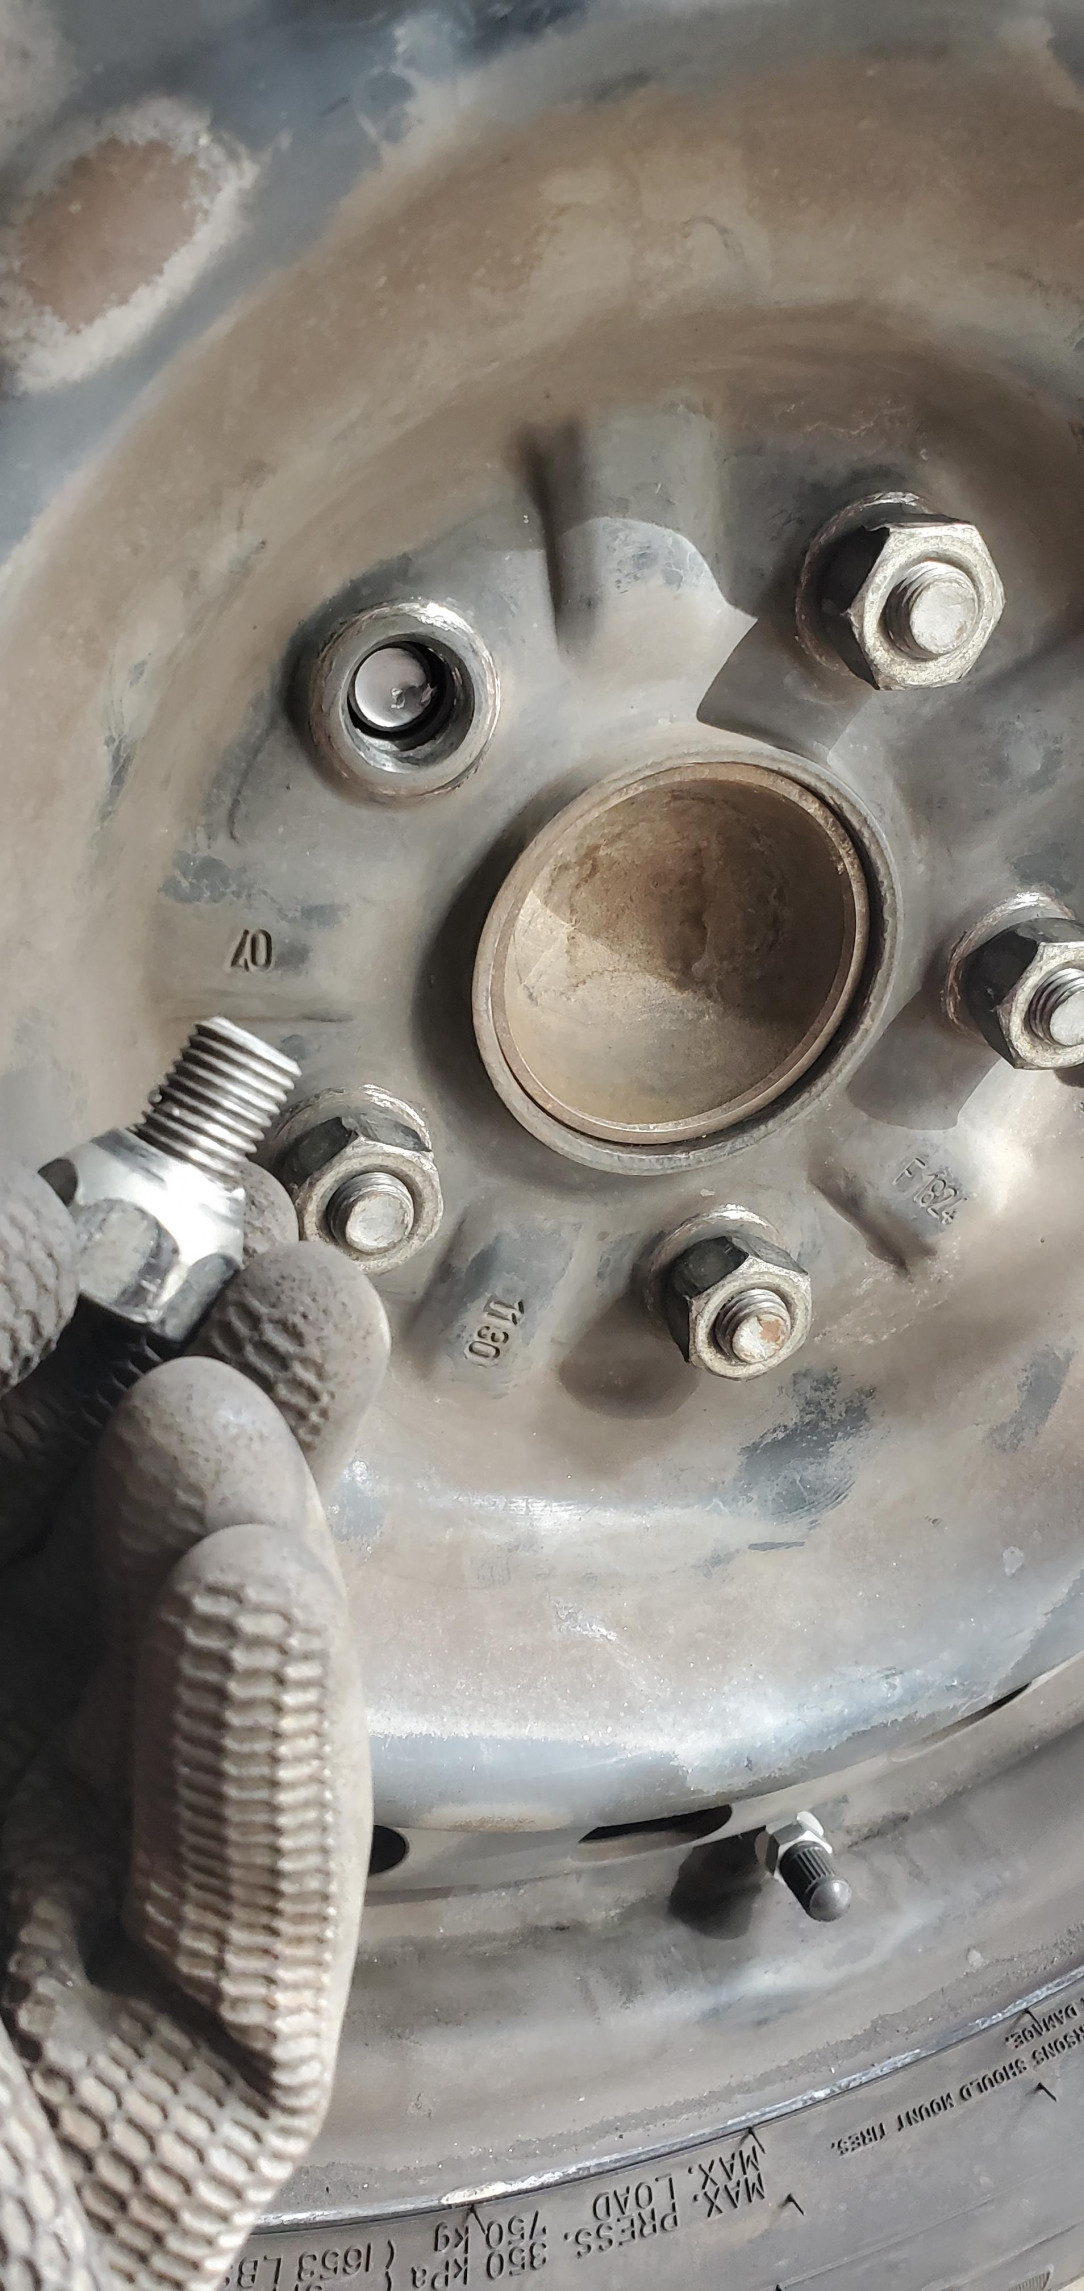 After a simple brake job turned into a complicated repair, this was the last lugnut to tighten